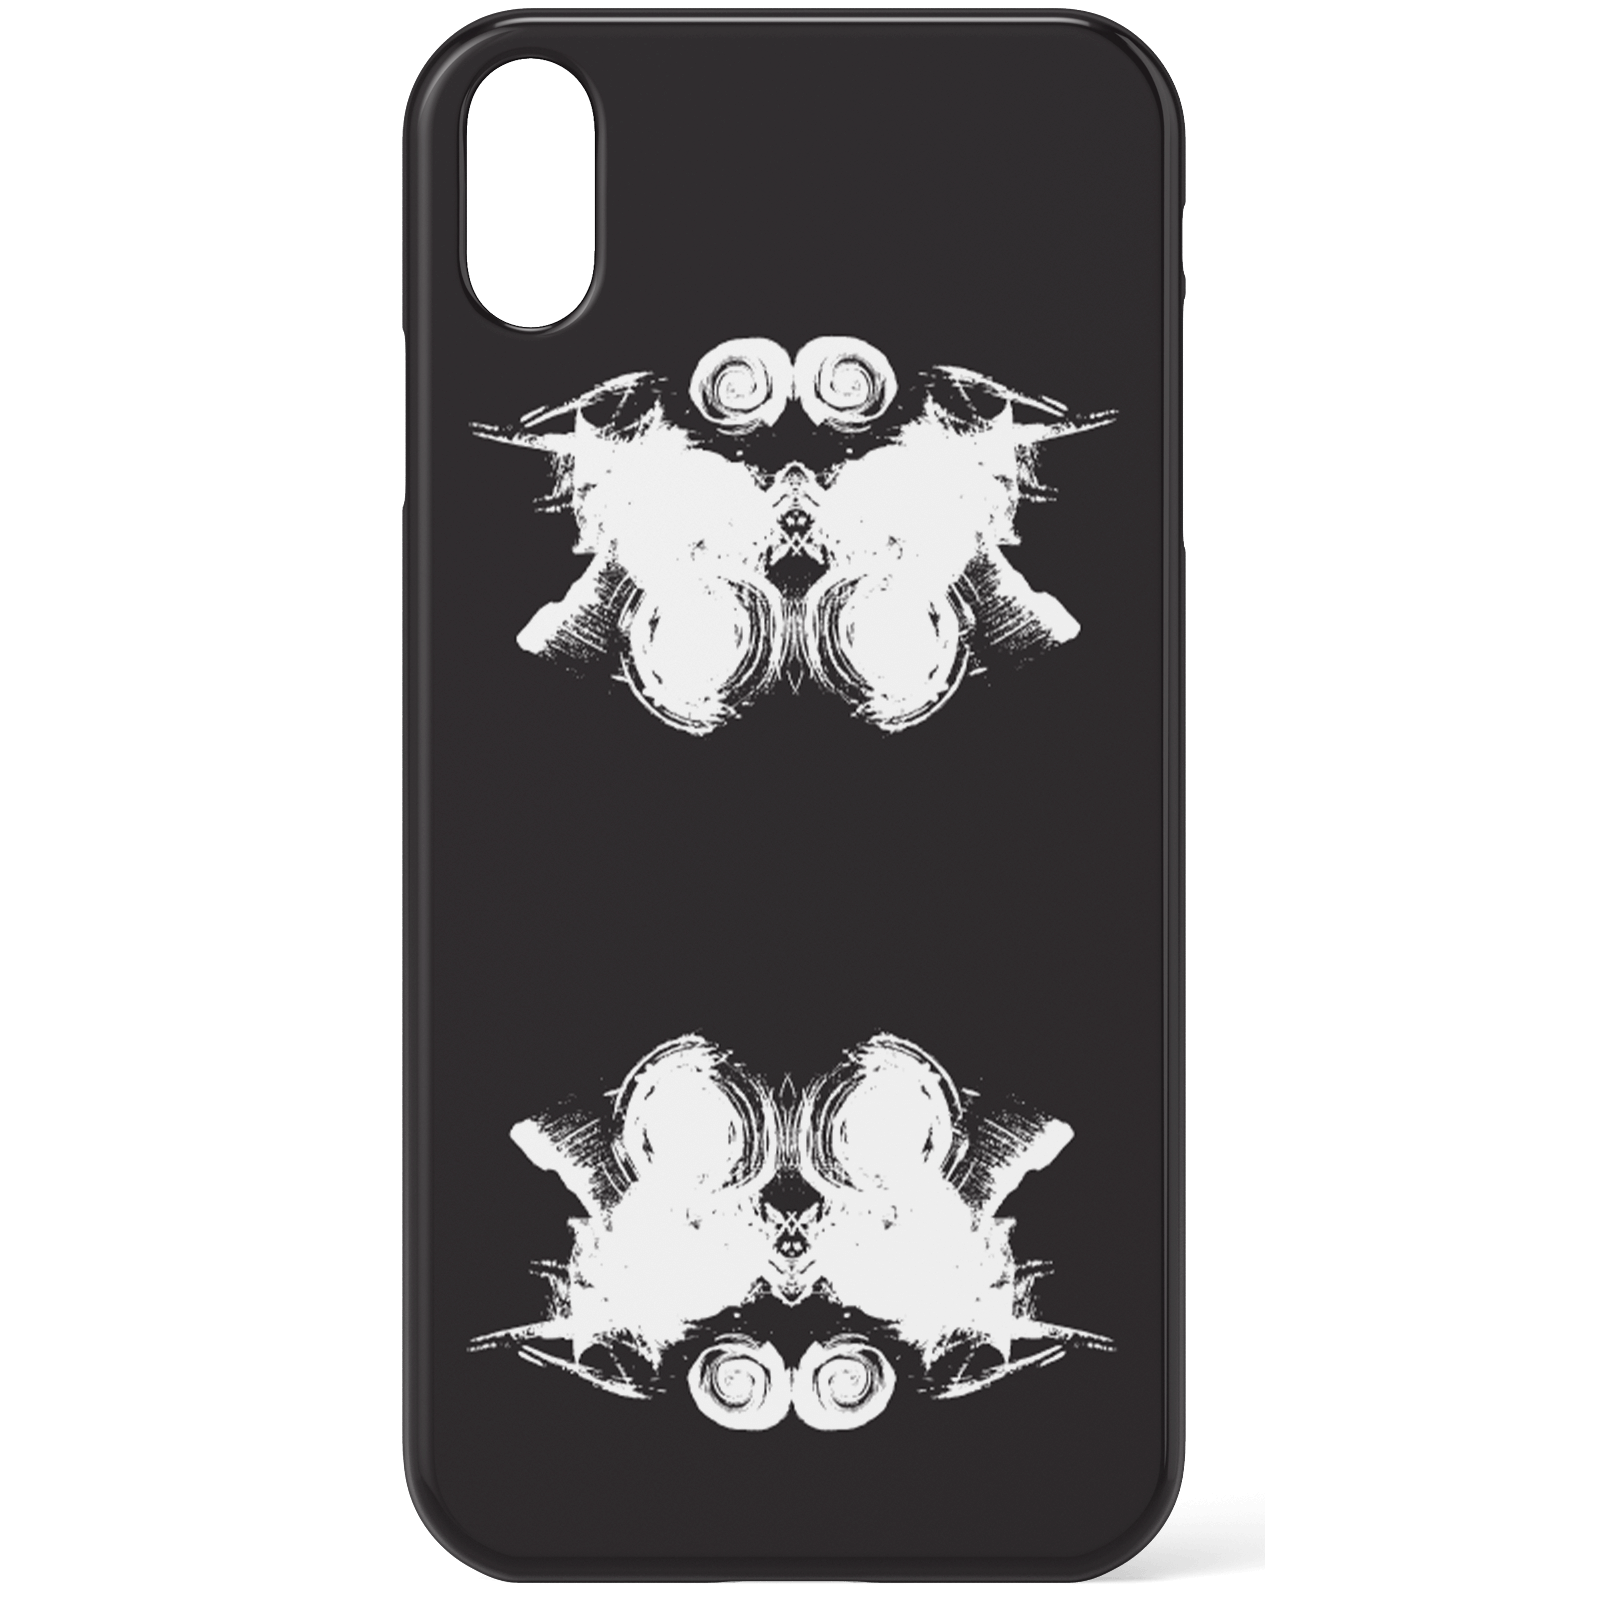 Rorschach Inkblots Phone Case for iPhone and Android - iPhone 5/5s - Snap Case - Matte